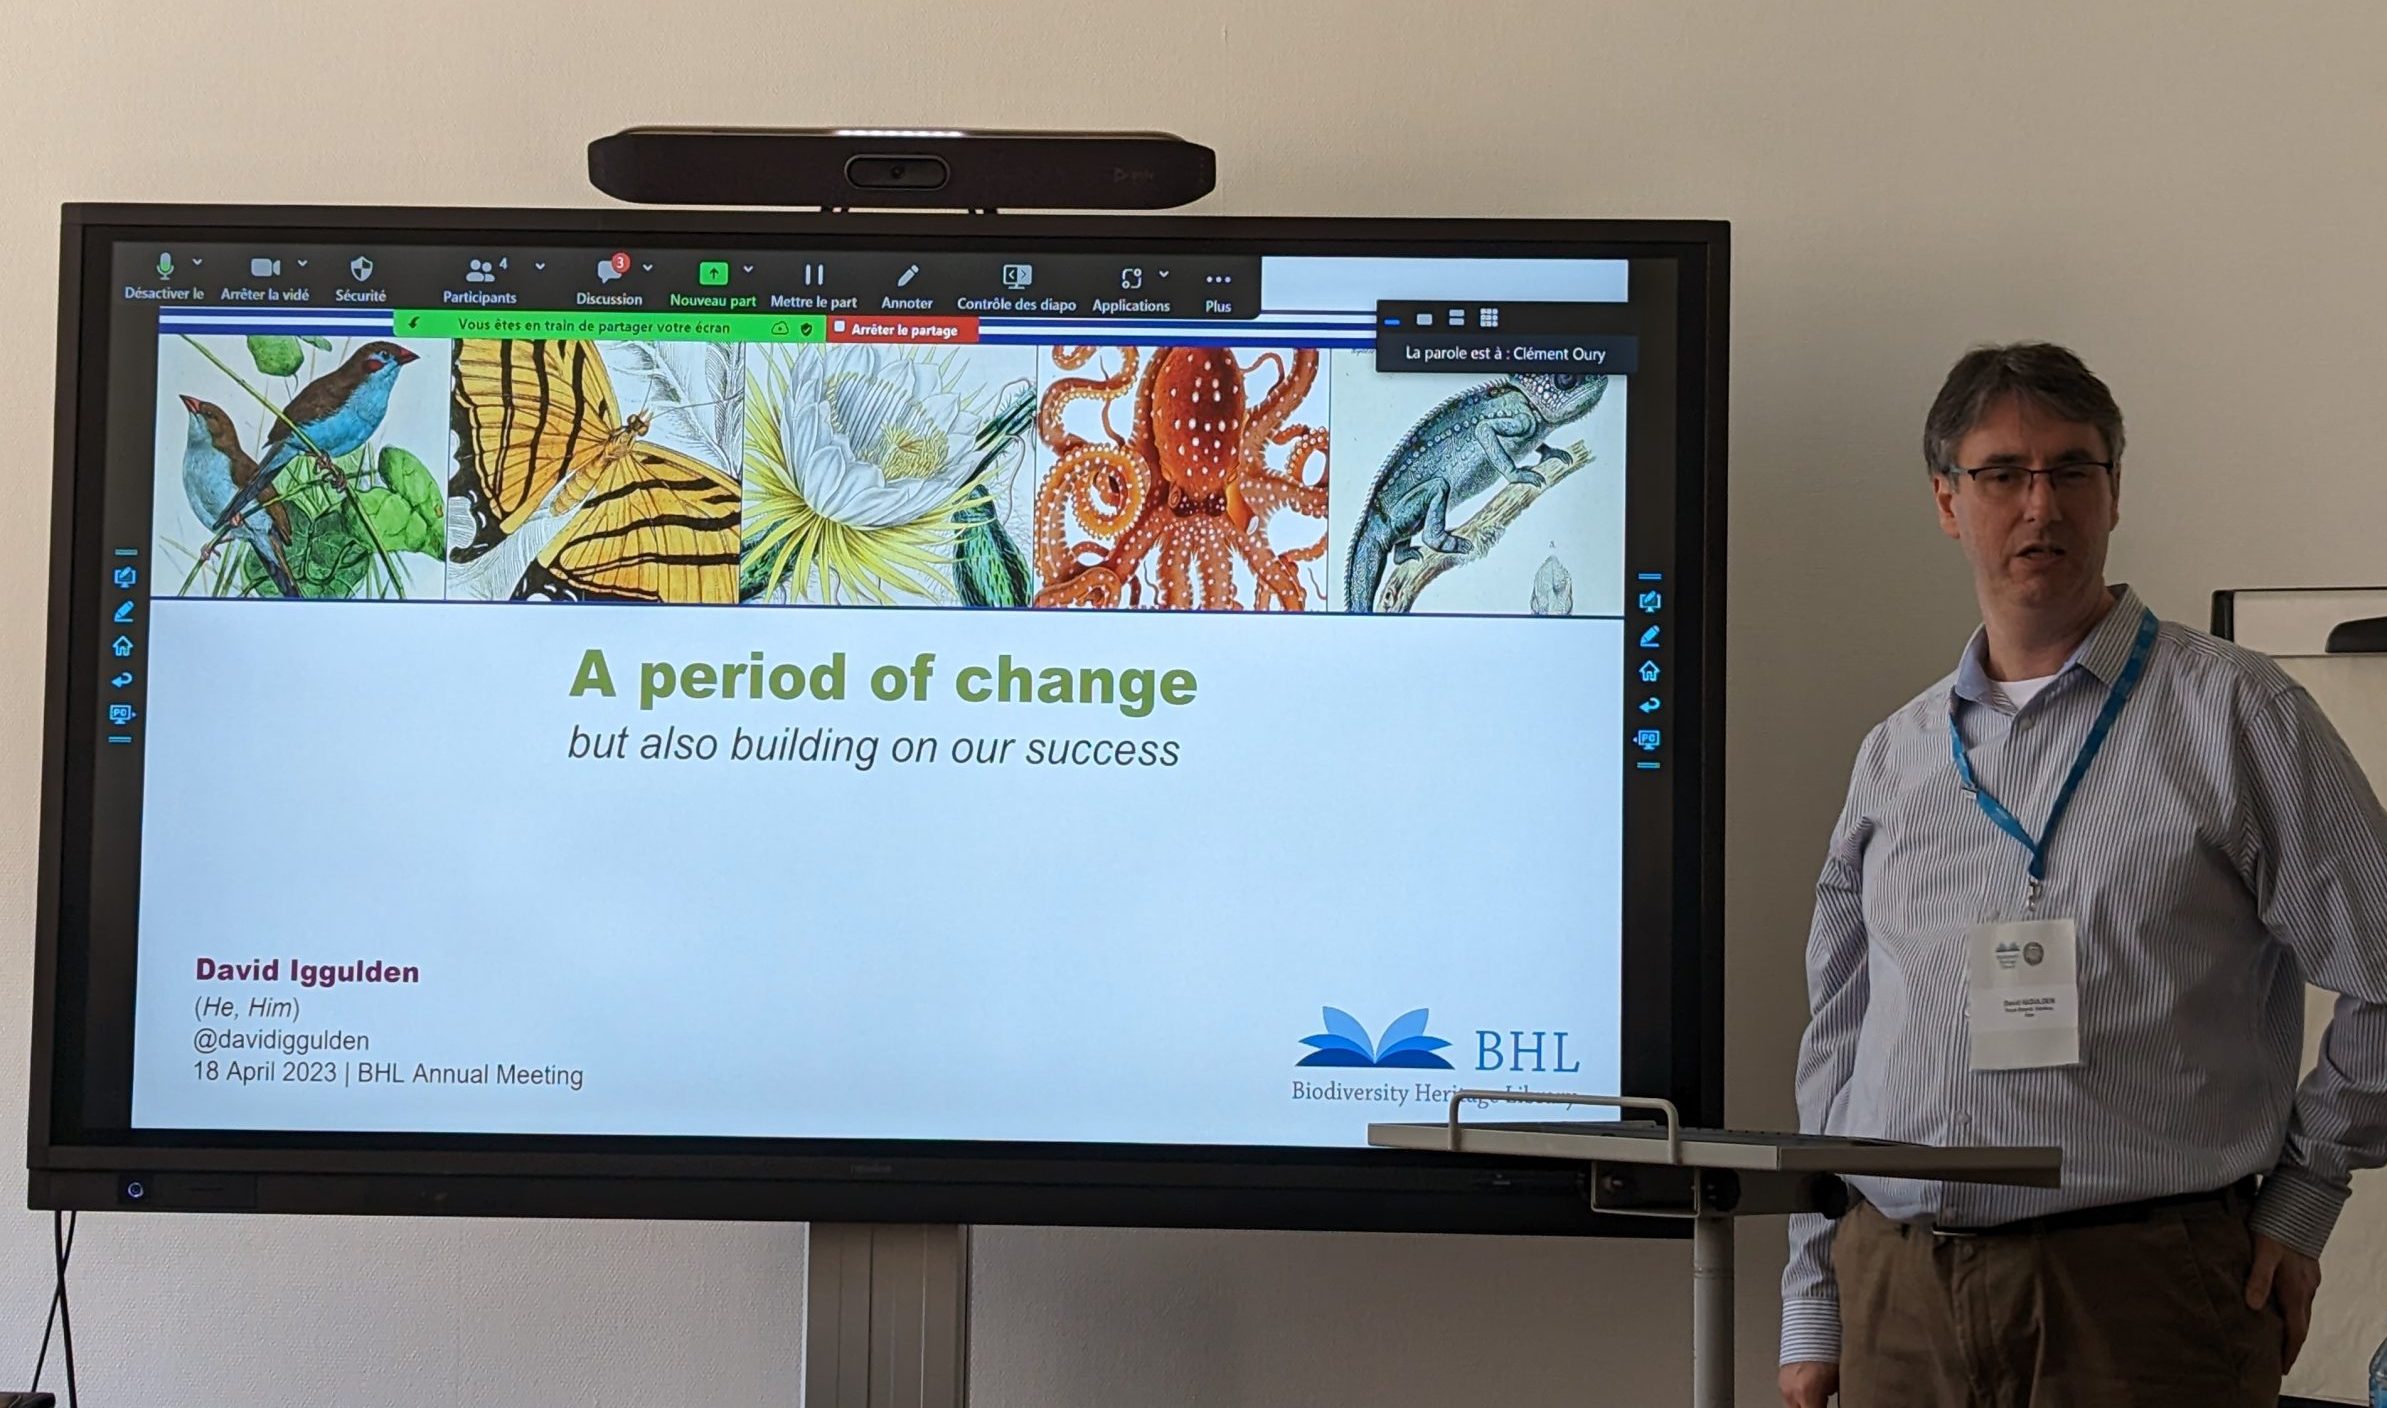 David Iggulden stands next to a large monitor to begin his talk at the BHL Annual Meeting